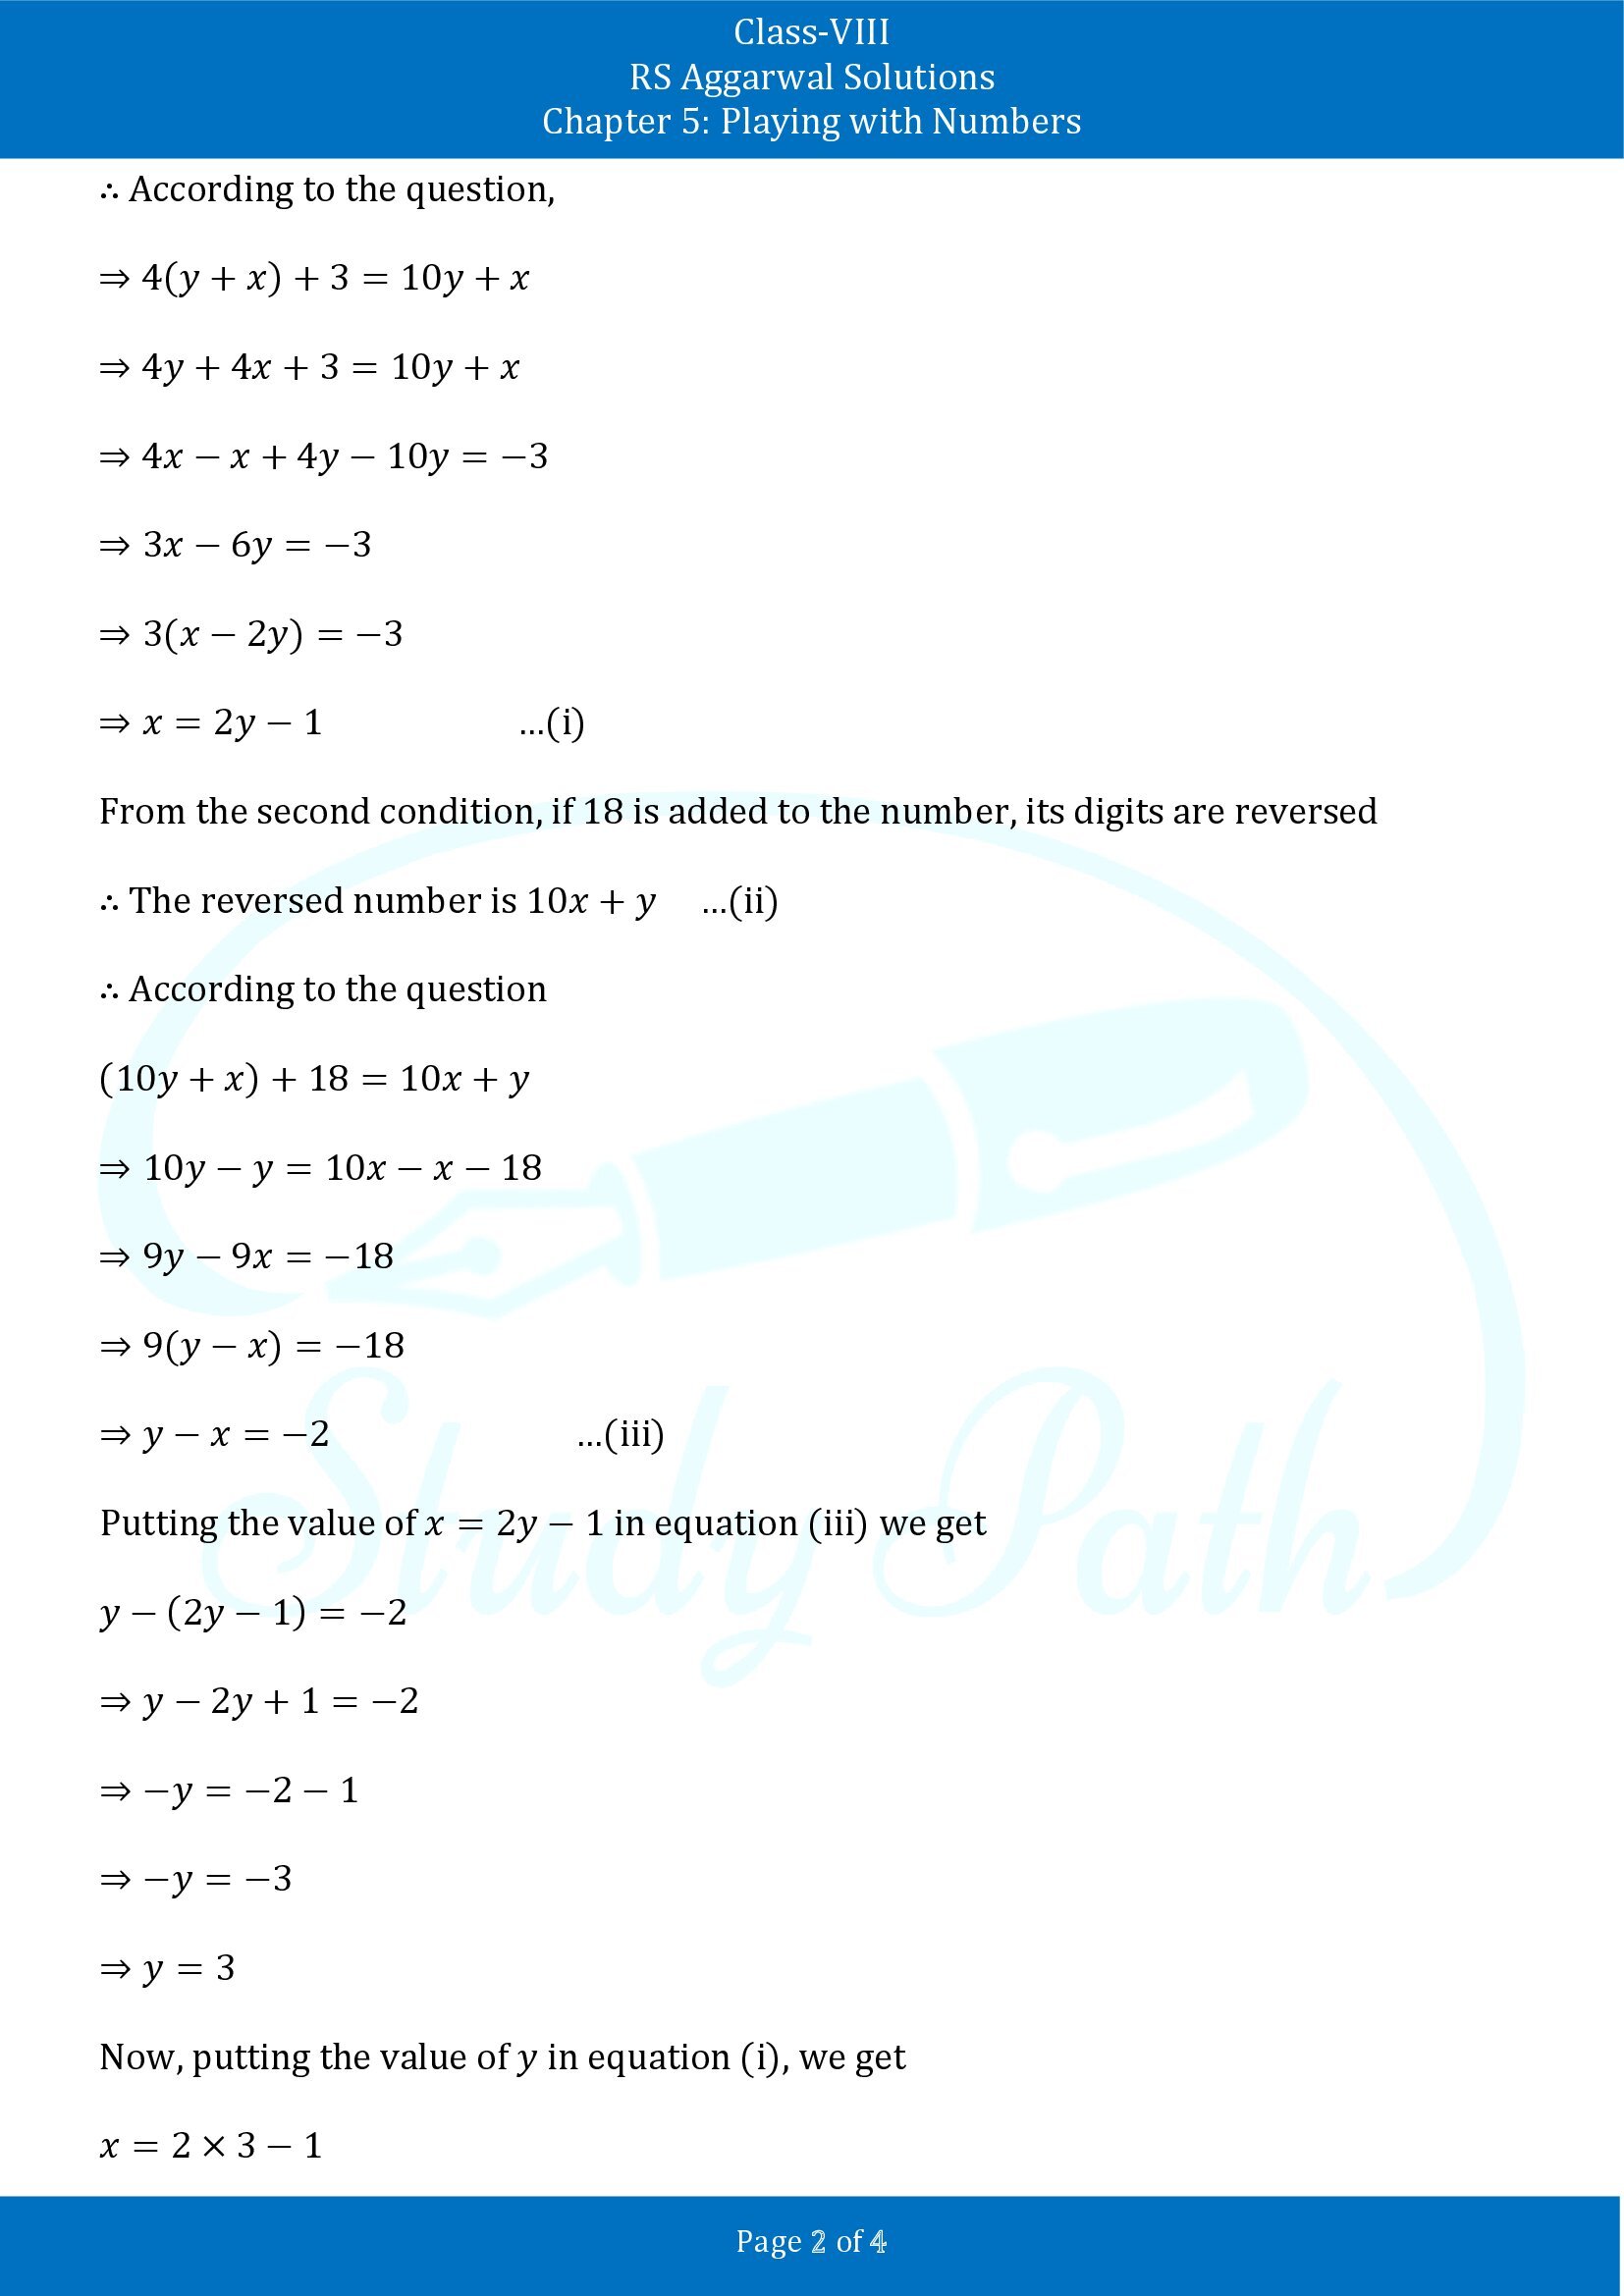 RS Aggarwal Solutions Class 8 Chapter 5 Playing with Numbers Exercise 5A 00002